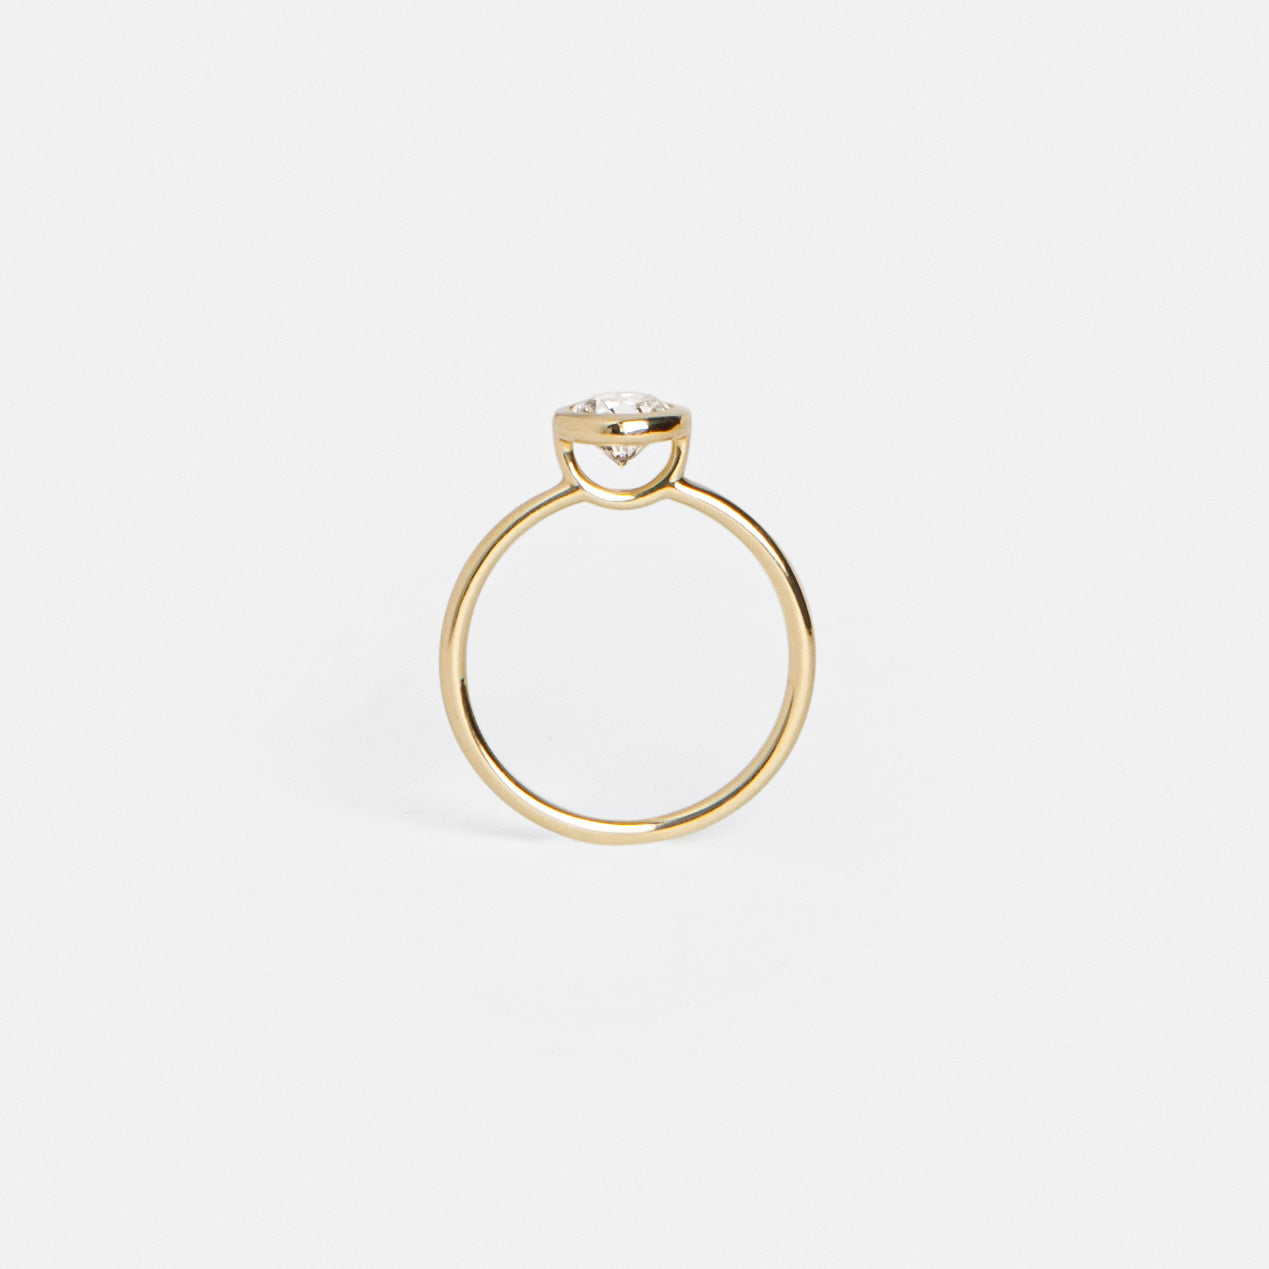 Arti Thin Ring in 14k Gold set with a 0.9ct round brilliant cut natural diamond By SHW Fine Jewelry NYC